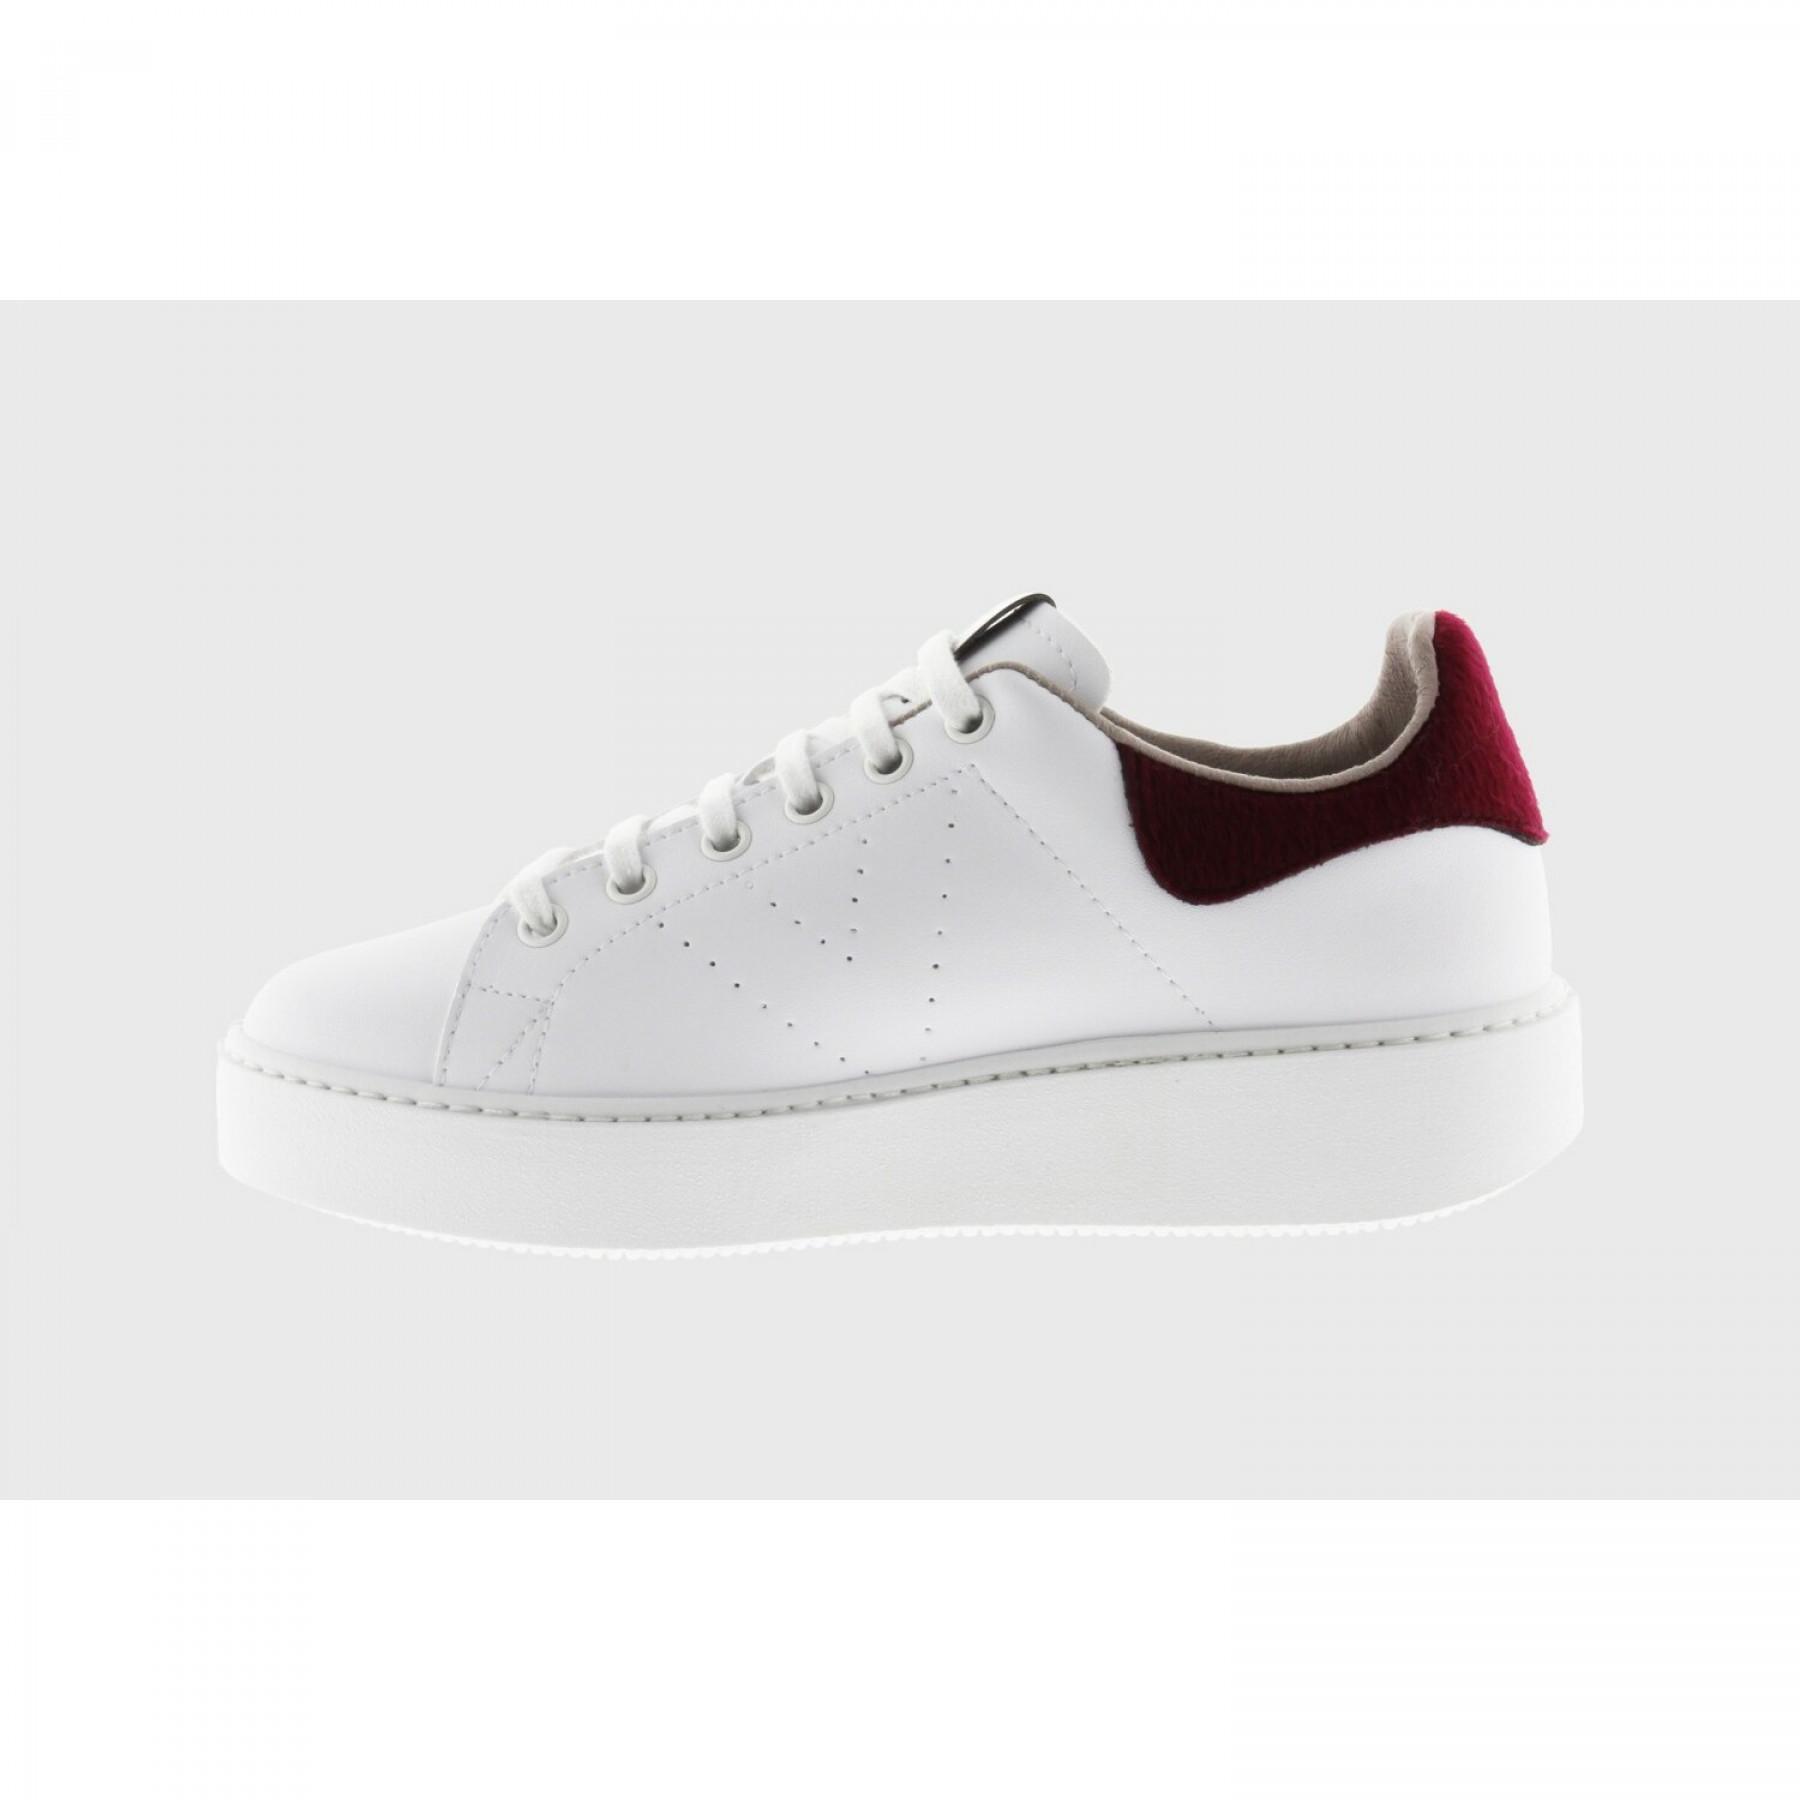 Sneakers woman Victoria 1260137